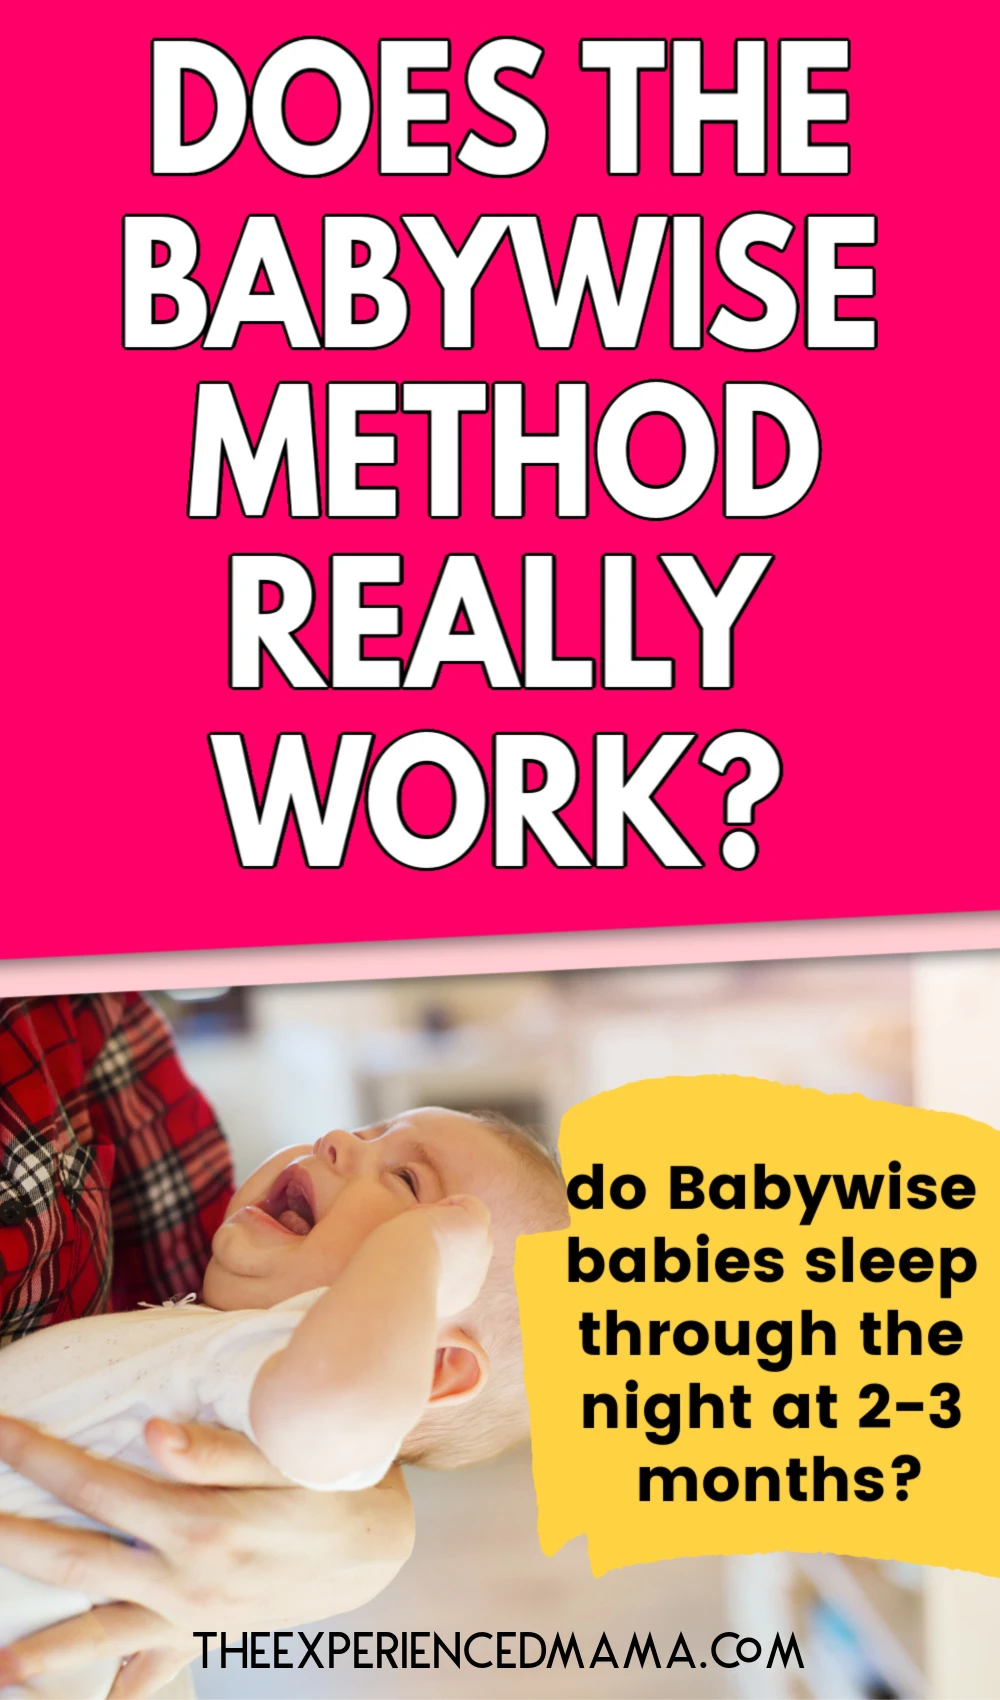 mom trying to use the babywise method, letting baby cry, with text overlay, "does the baby wise method really work?"